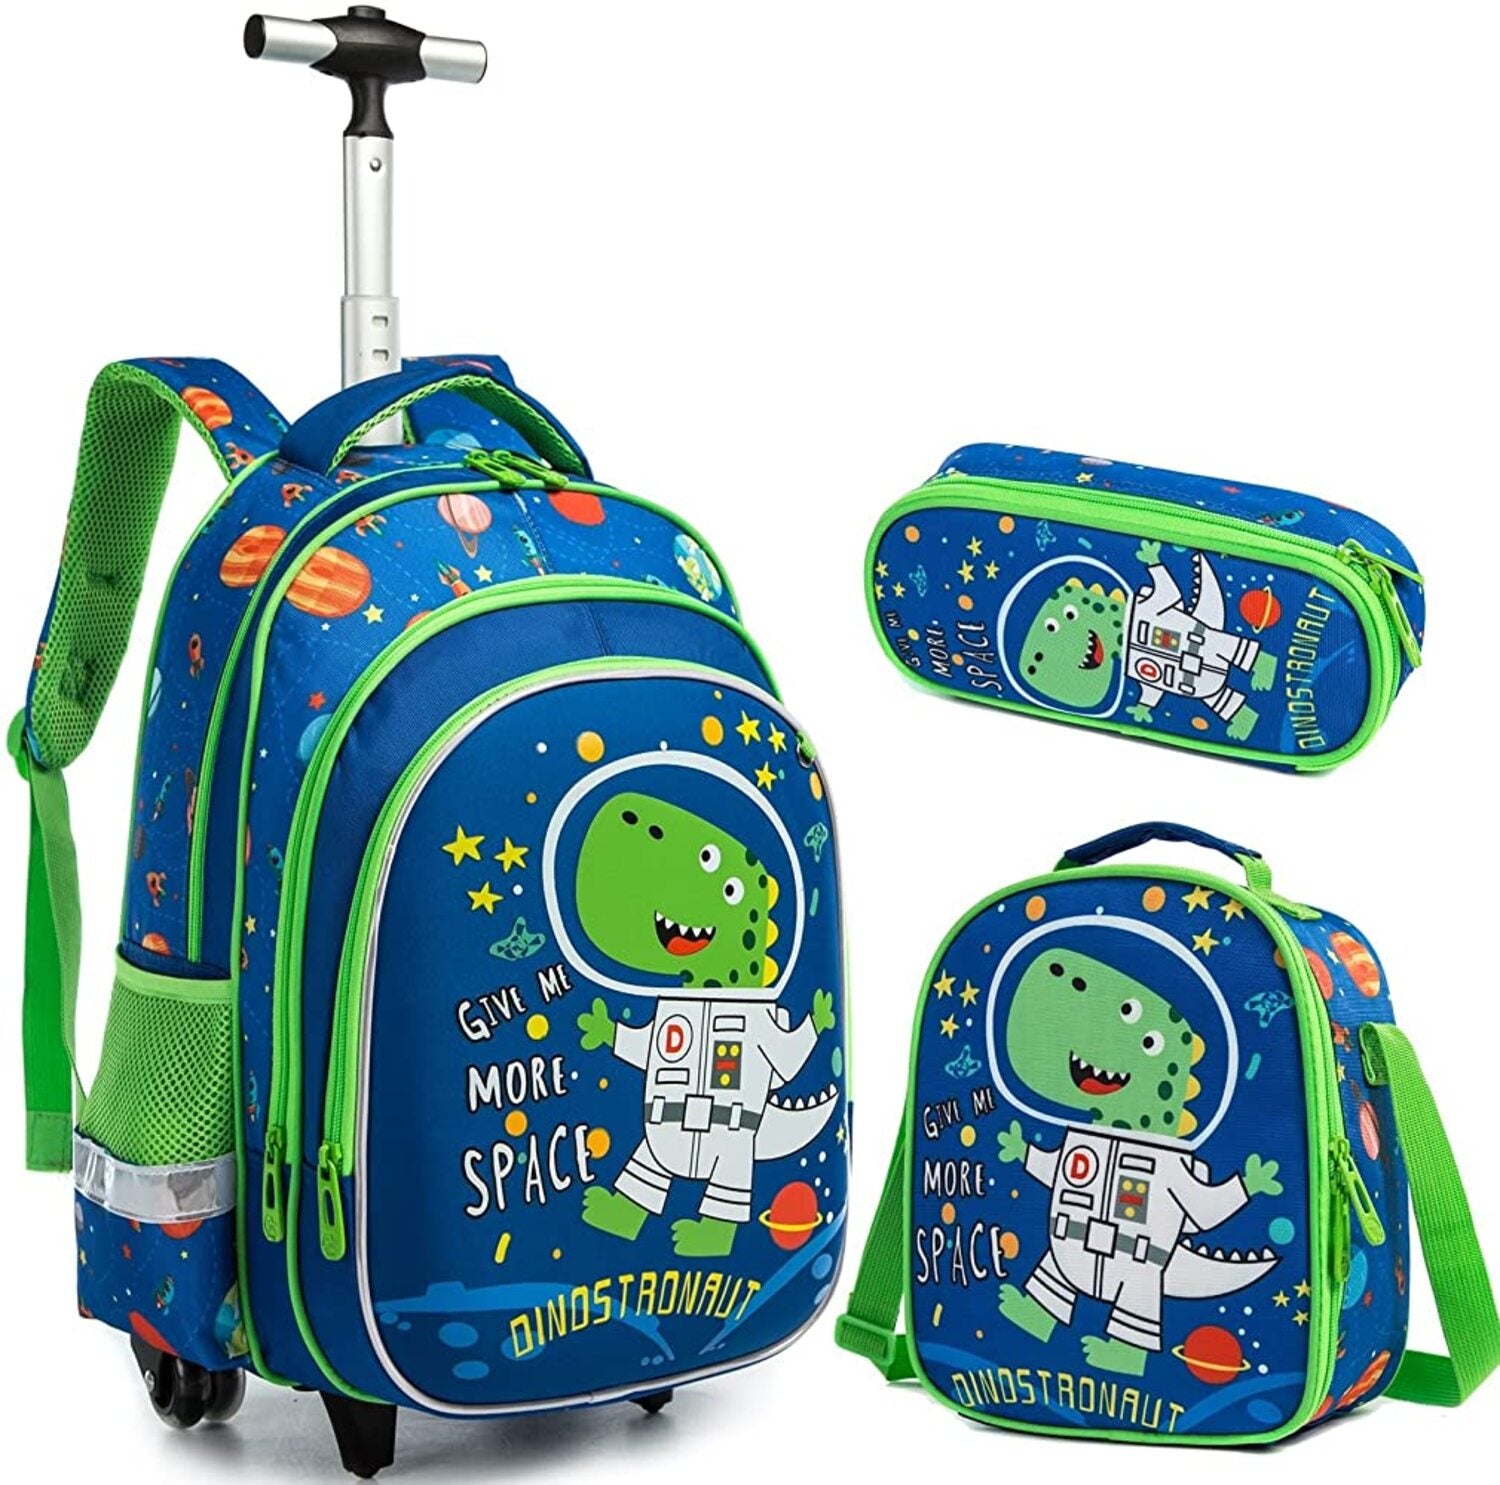 10 Book Bags for Kids: Fun and Functional Options